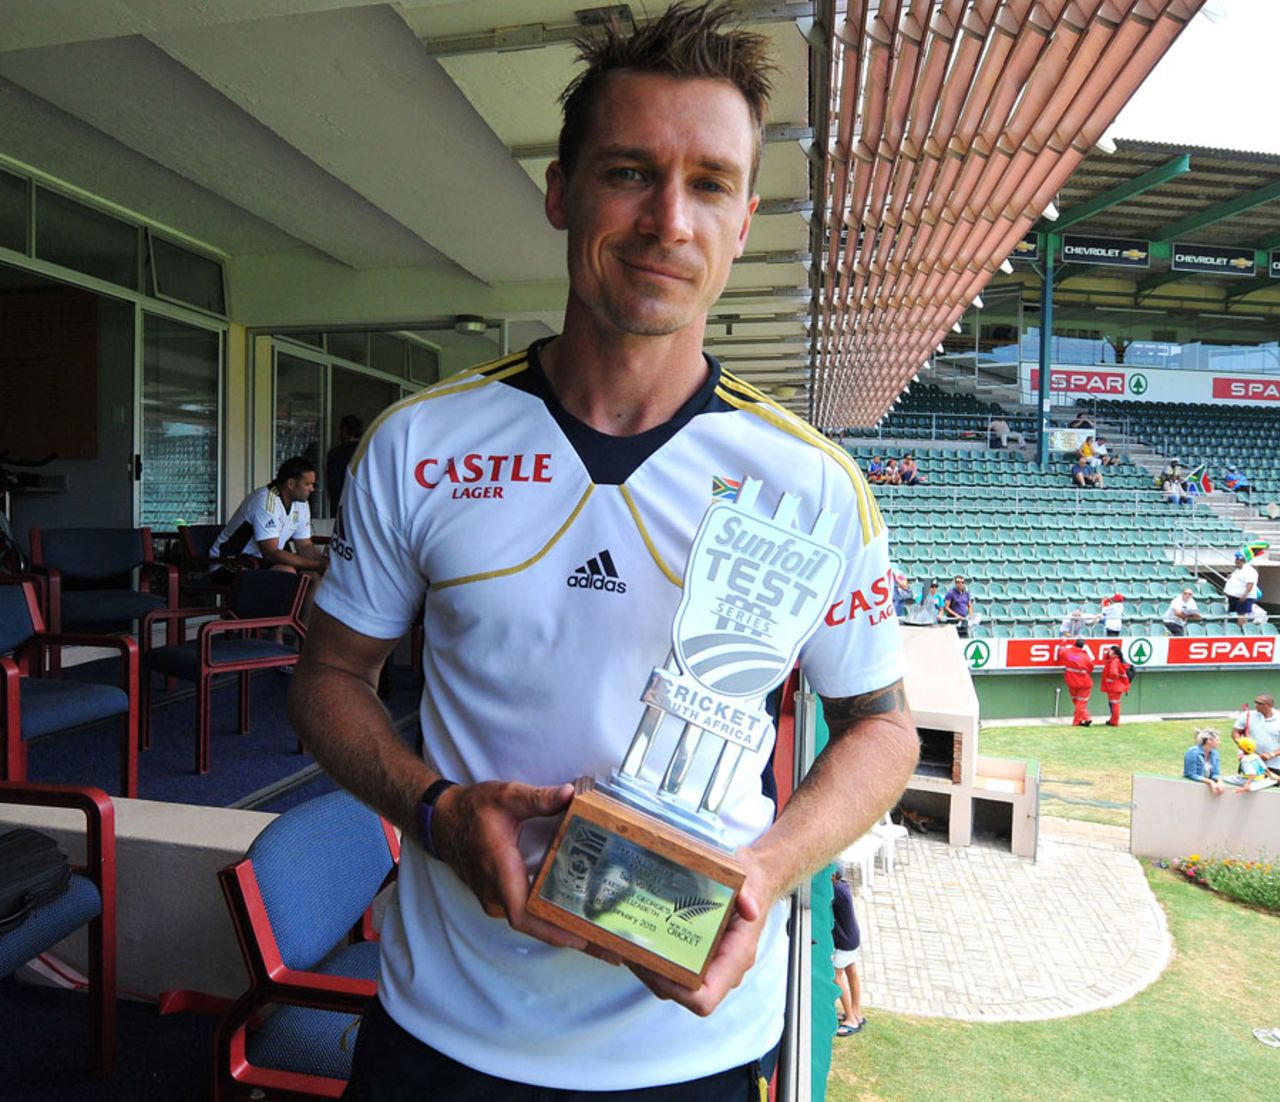 Dale Steyn with his Man of the Match award, South Africa v New Zealand, 2nd Test, Port Elizabeth, 4th day, January 14, 2013